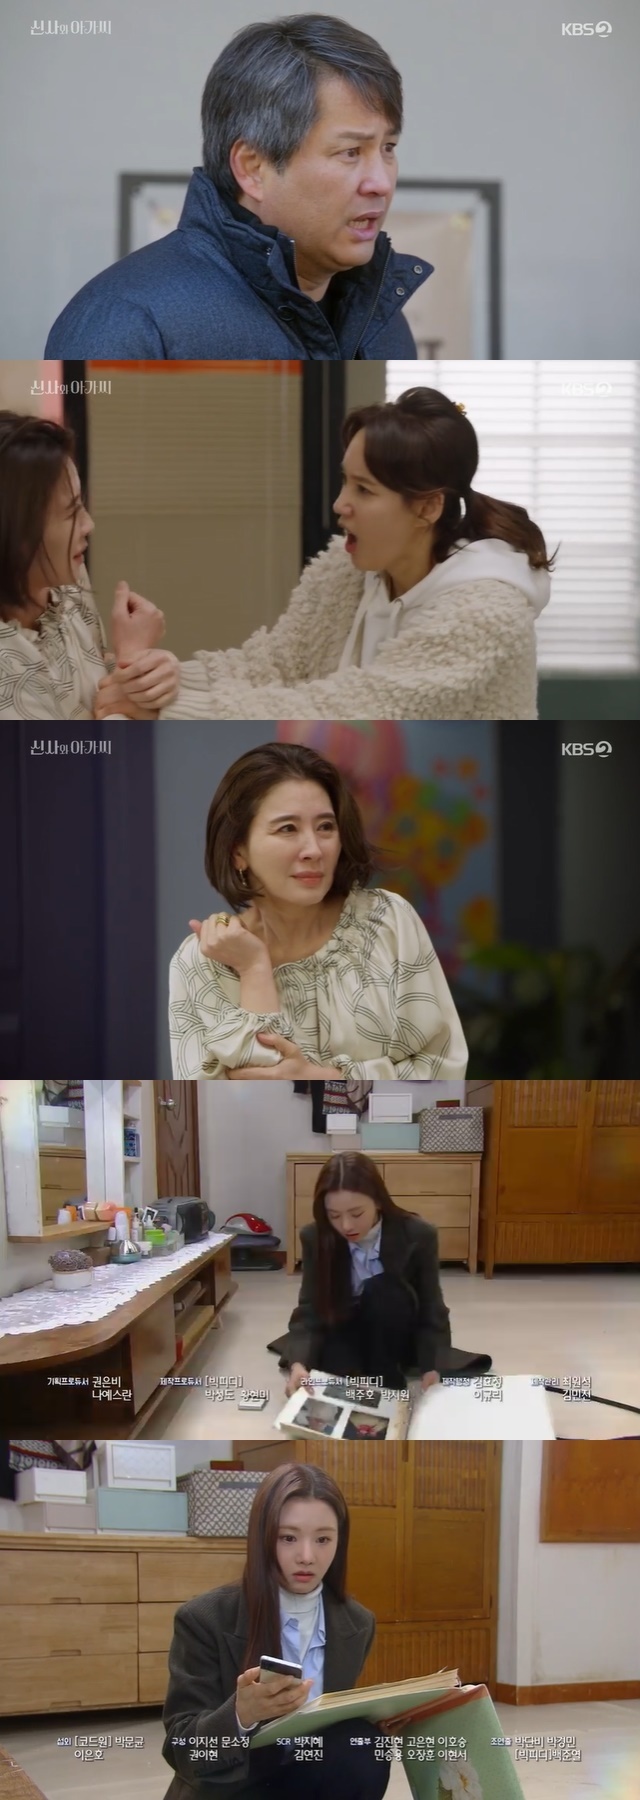 Lee Se-hee and Ji Hyun Woo were drawn to know the identity of Lee Il-hwa side by side.In the 40th episode of KBS 2TV weekend drama Shinto and Young Lady (played by Kim Sa-kyung, directed by Shin Chang-seok), which aired on February 12, she was in crisis ahead of her happy United States of America with her biological daughter, Park Dan-dan (Lee Se-hee), of Anna Nicole Smith Kim (Kim Ji Young, Lee Il-hwa).Anna Nicole Smith Kim secretly met Park Soo-chul (Lee Jong-won) and found it by Cha Yeon-sil (Oh Hyun-kyung).Park Soo-cheol excused Parks meeting to discuss the issue of United States of America, but Cha Yeon-sil did not erase his doubts, and Park Soo-cheol followed him when he was contacted by someone and slipped away.Park Su-cheol met her opponent, also Anna Nicole Smith Kim.Cha Yeon-sil heard Park Su-cheol warn Anna Nicole Smith Kim, Never tell me youre a mother, and she noticed that Anna Nicole Smith Kim was Park Dan-dans biological mother.Anna Nicole Smith Kim, Park Soo-cheol, who had been secretly meeting and thought that she was going to leave for United States of America together with her, showed up in front of the two people with anger.Park Soo-chul told Cha Yeon-sil that Anna Nicole Smith Kim had undergone plastic surgery more than 10 times in the past accident.That explains that he did not know that Anna Nicole Smith Kim was the mother of Park Dan Dan.After understanding the situation, Cha Yeon-sil decided to cover the secret of Anna Nicole Smith Kim, but after the sudden fire, she went to Anna Nicole Smith Kim and grabbed her hair and took a fuss.Anna Nicole Smith Kim immediately informed Park Soo-chul of the chasm room, and Park Soo-chul fought with the couple who came home.The voice of this process came to a great extent, and eventually I realized that Anna Nicole Smith Kim was the mother of Park Dan Dan, except Park Dan Dan Dan.The family members suggested that Park should know, but Park Soo-cheol insisted on Parks United States of America.Park Su-cheol thought I only had to keep secrets for a few days.But things didnt go back just as Park Su-cheol thought.Lee Young-guk (Ji Hyun Woo) started to ask about the whereabouts of Kim Ji Young, his mother, to listen to Parks wish to see her mothers back.In the trailer, Lee Young-guk, who was surprised to hear that Kim Ji Young, the mother of Park Dan-dan, was the same person as Anna Nicole Smith Kim.Park also noticed the identity of Anna Nicole Smith Kim himself.In the trailer, Anna Nicole Smith Kims errands found Anna Nicole Smith Kims officetel and found a picture of her baby in a pile of luggage.Park, who questioned this, was later confirmed that Anna Nicole Smith Kim was her own mother and said, My mother is Anna Nicole Smith?It is noteworthy what kind of choice Park Dan-dan will make when he finds out the identity of Anna Nicole Smith Kim.